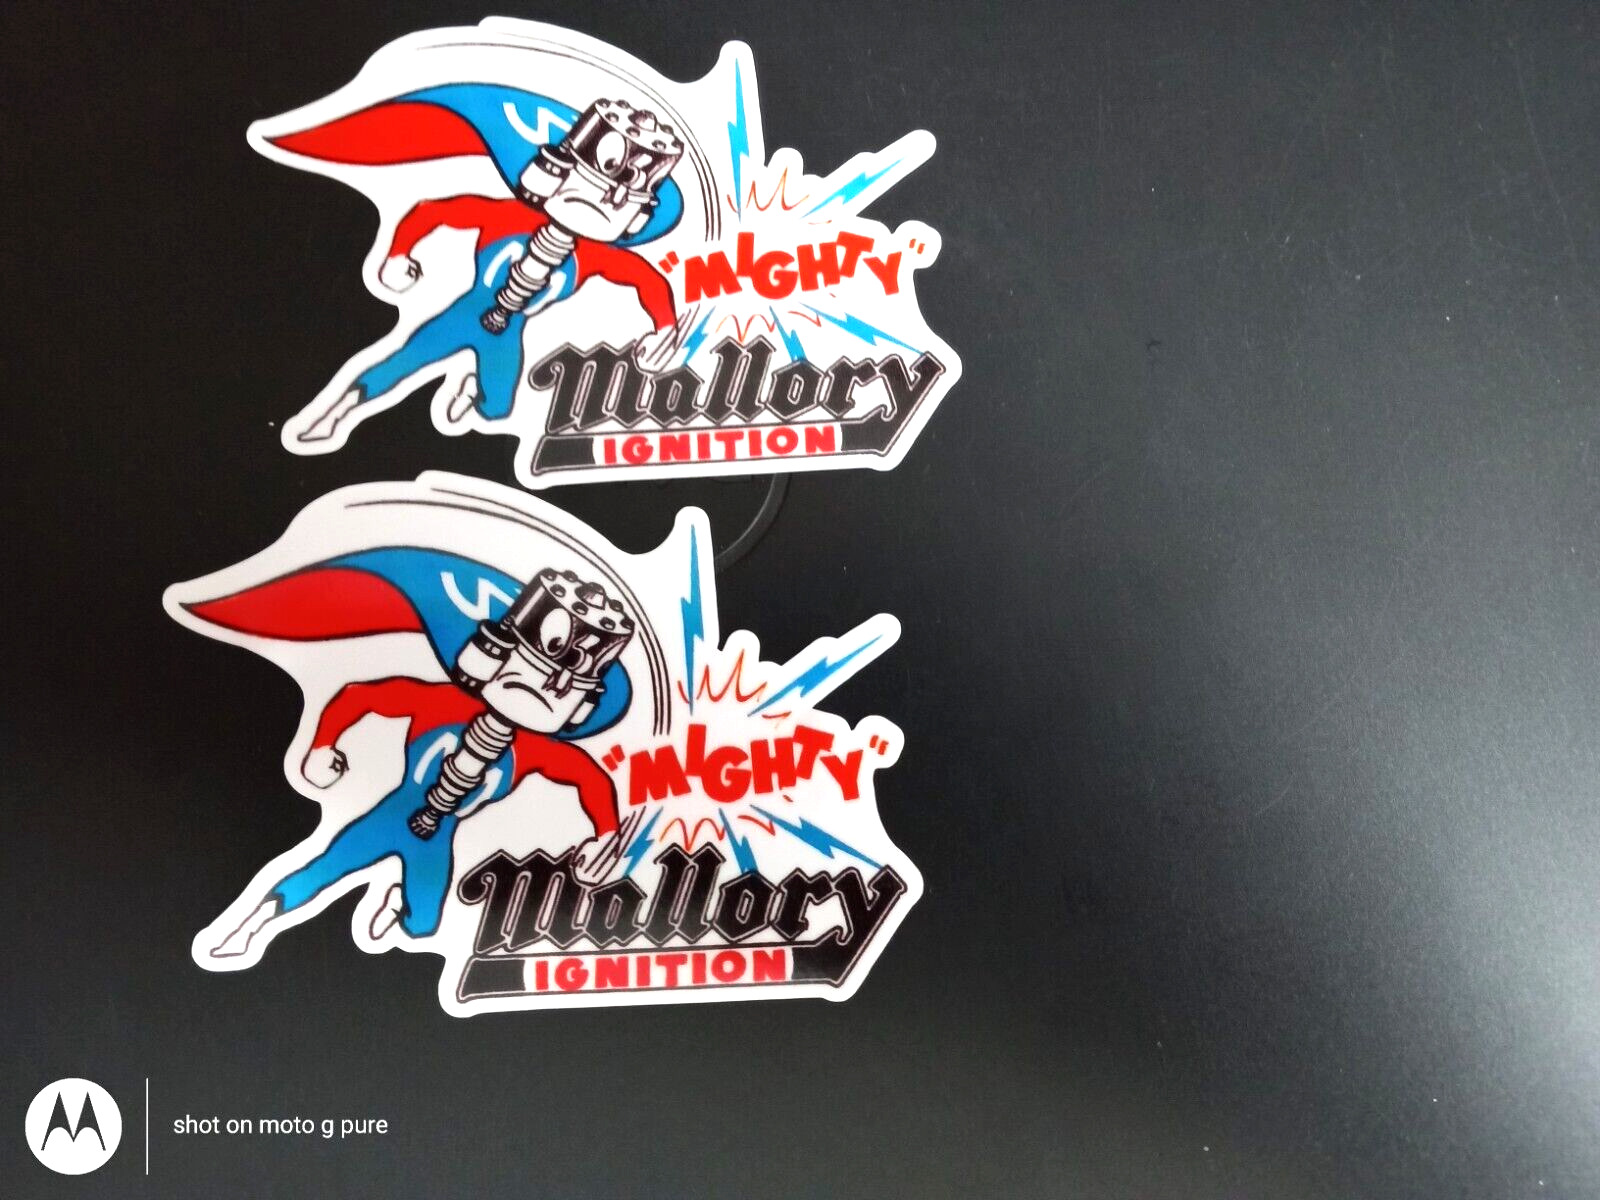 Mallory Ignition Stickers Sold In Lots Of (2) At $7.85 With 